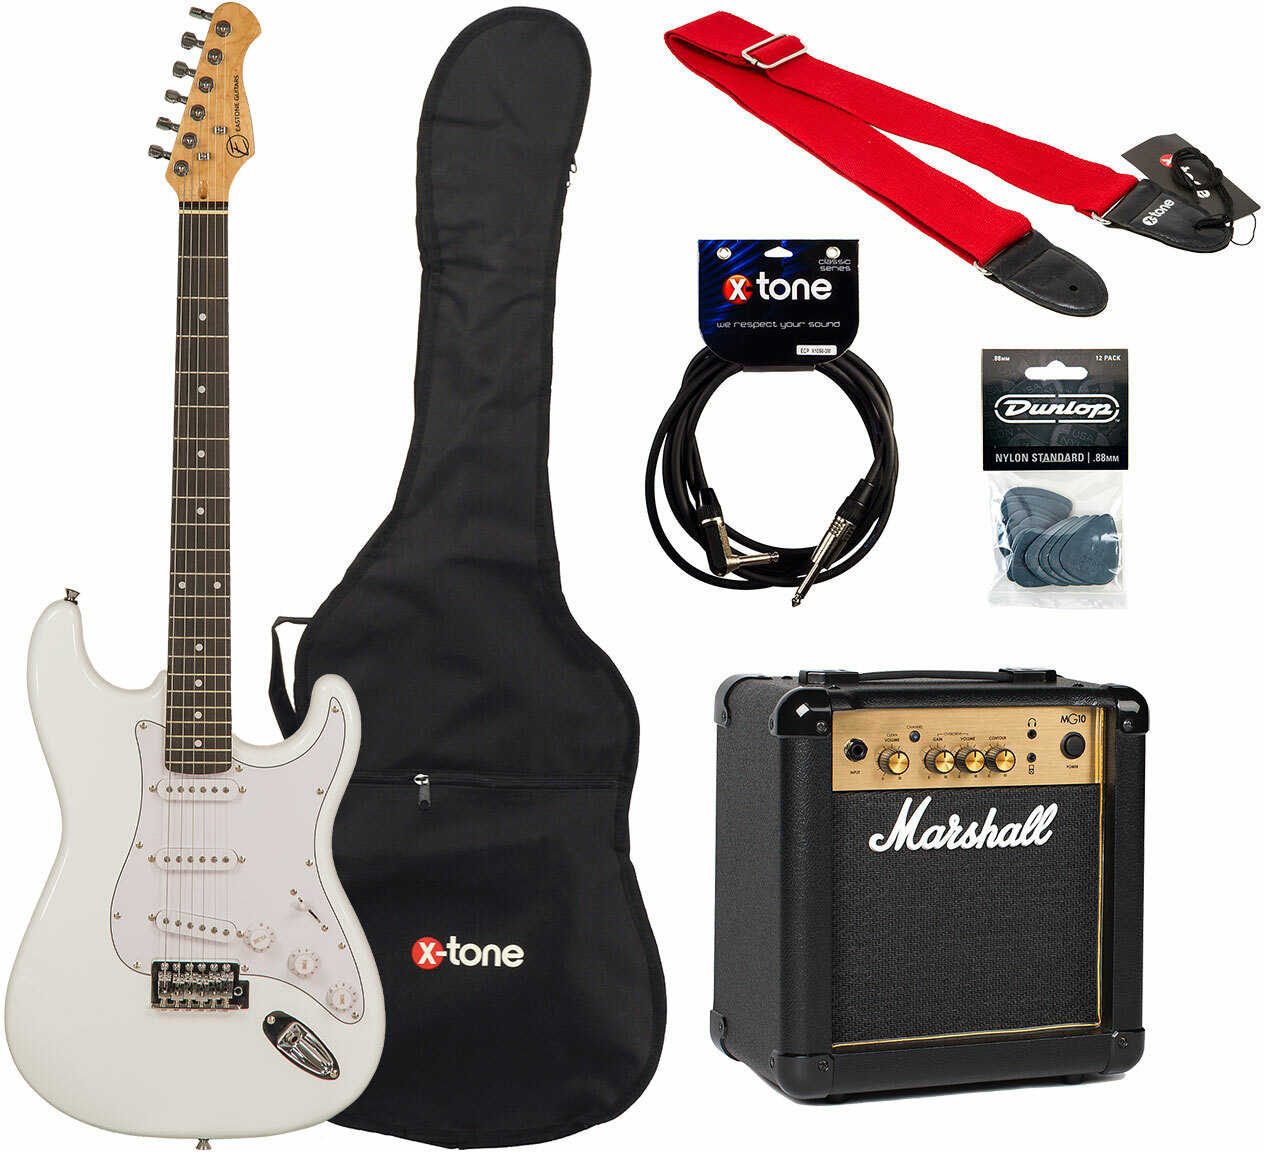 Eastone Str70 +marshall Mg10 10w +cable +mediators +housse - Olympic White - Pack Guitare Électrique - Main picture